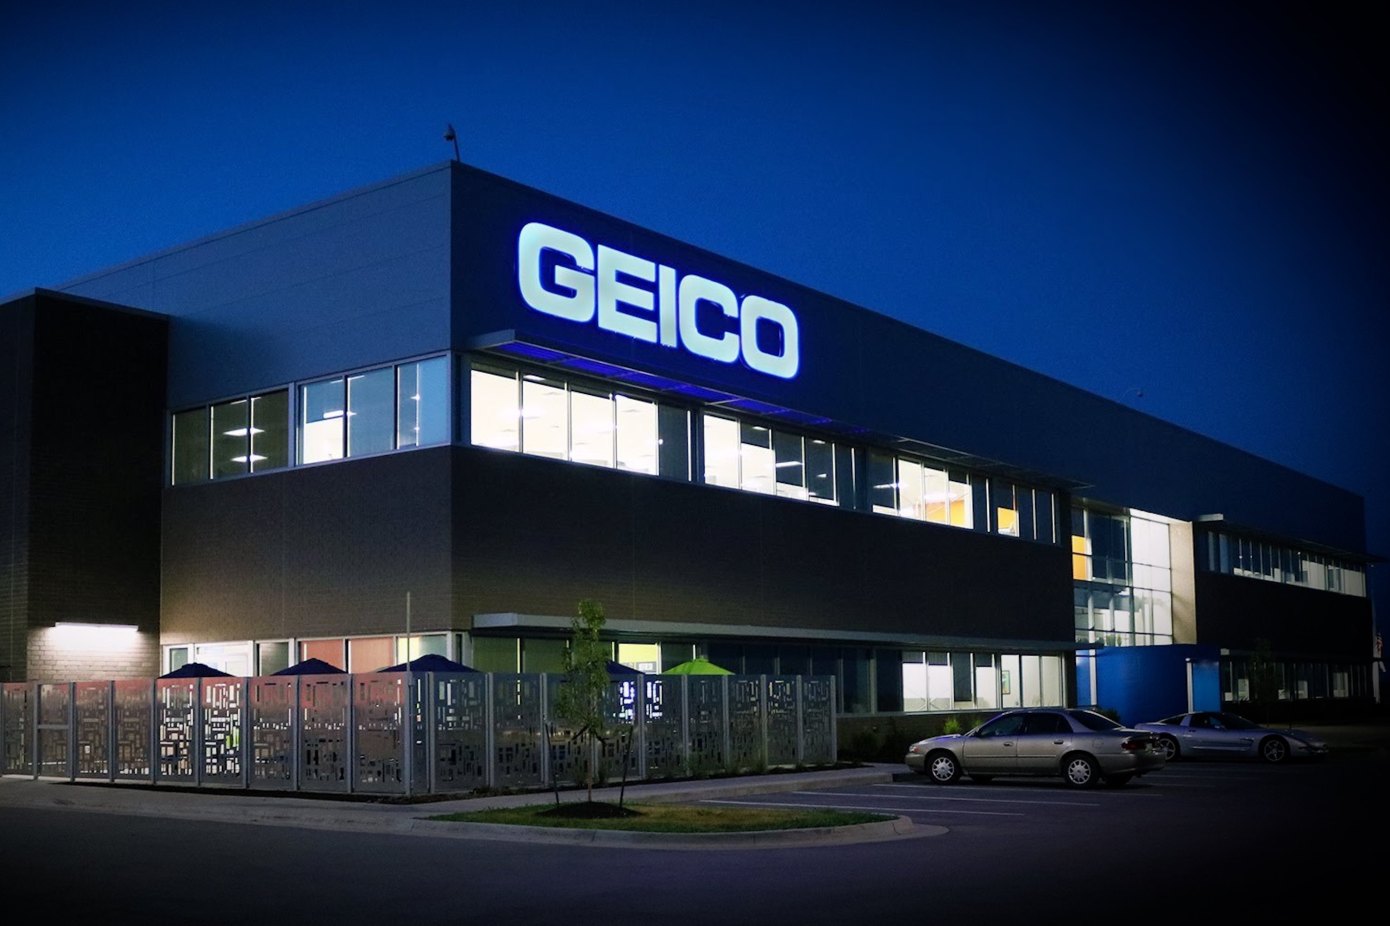 Geico admits fraudsters stole customers’ driver’s license numbers for months